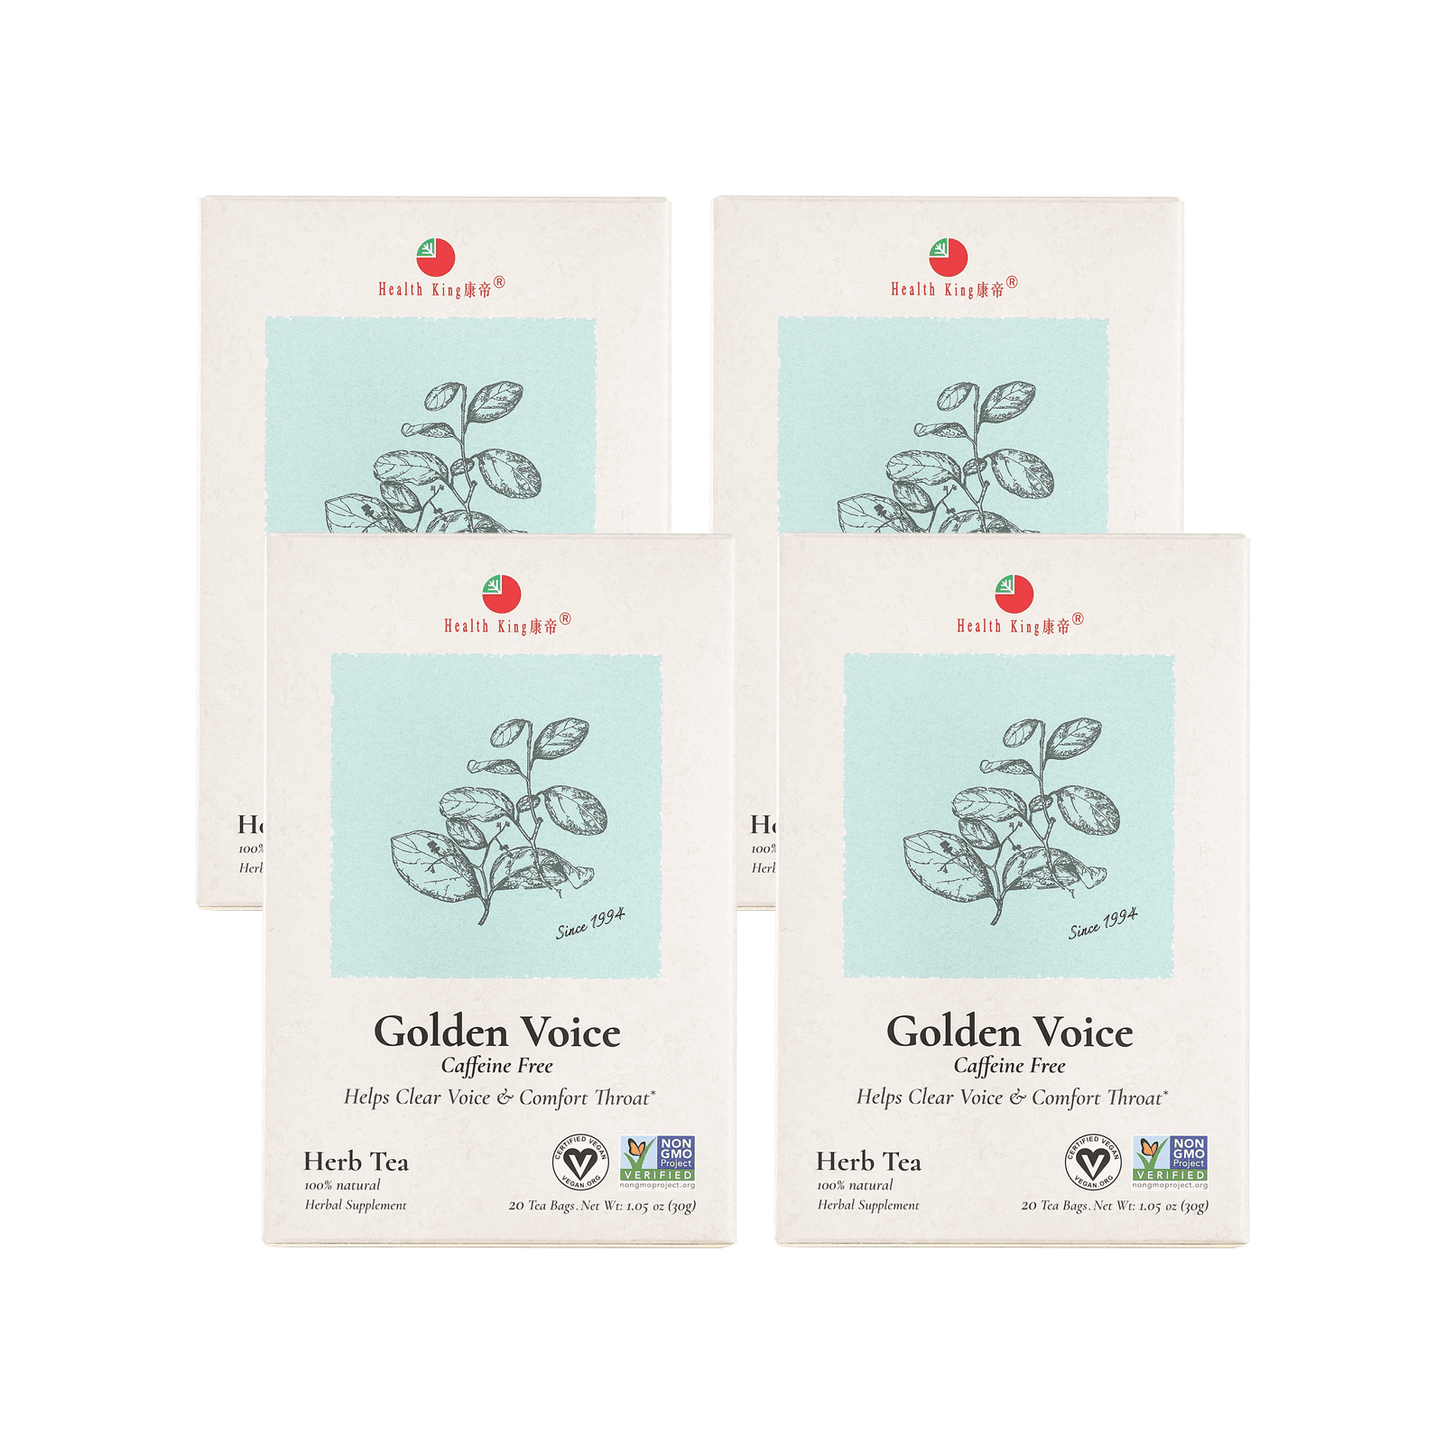 Multiple Golden Voice Herb Tea packets arranged on a pristine white surface